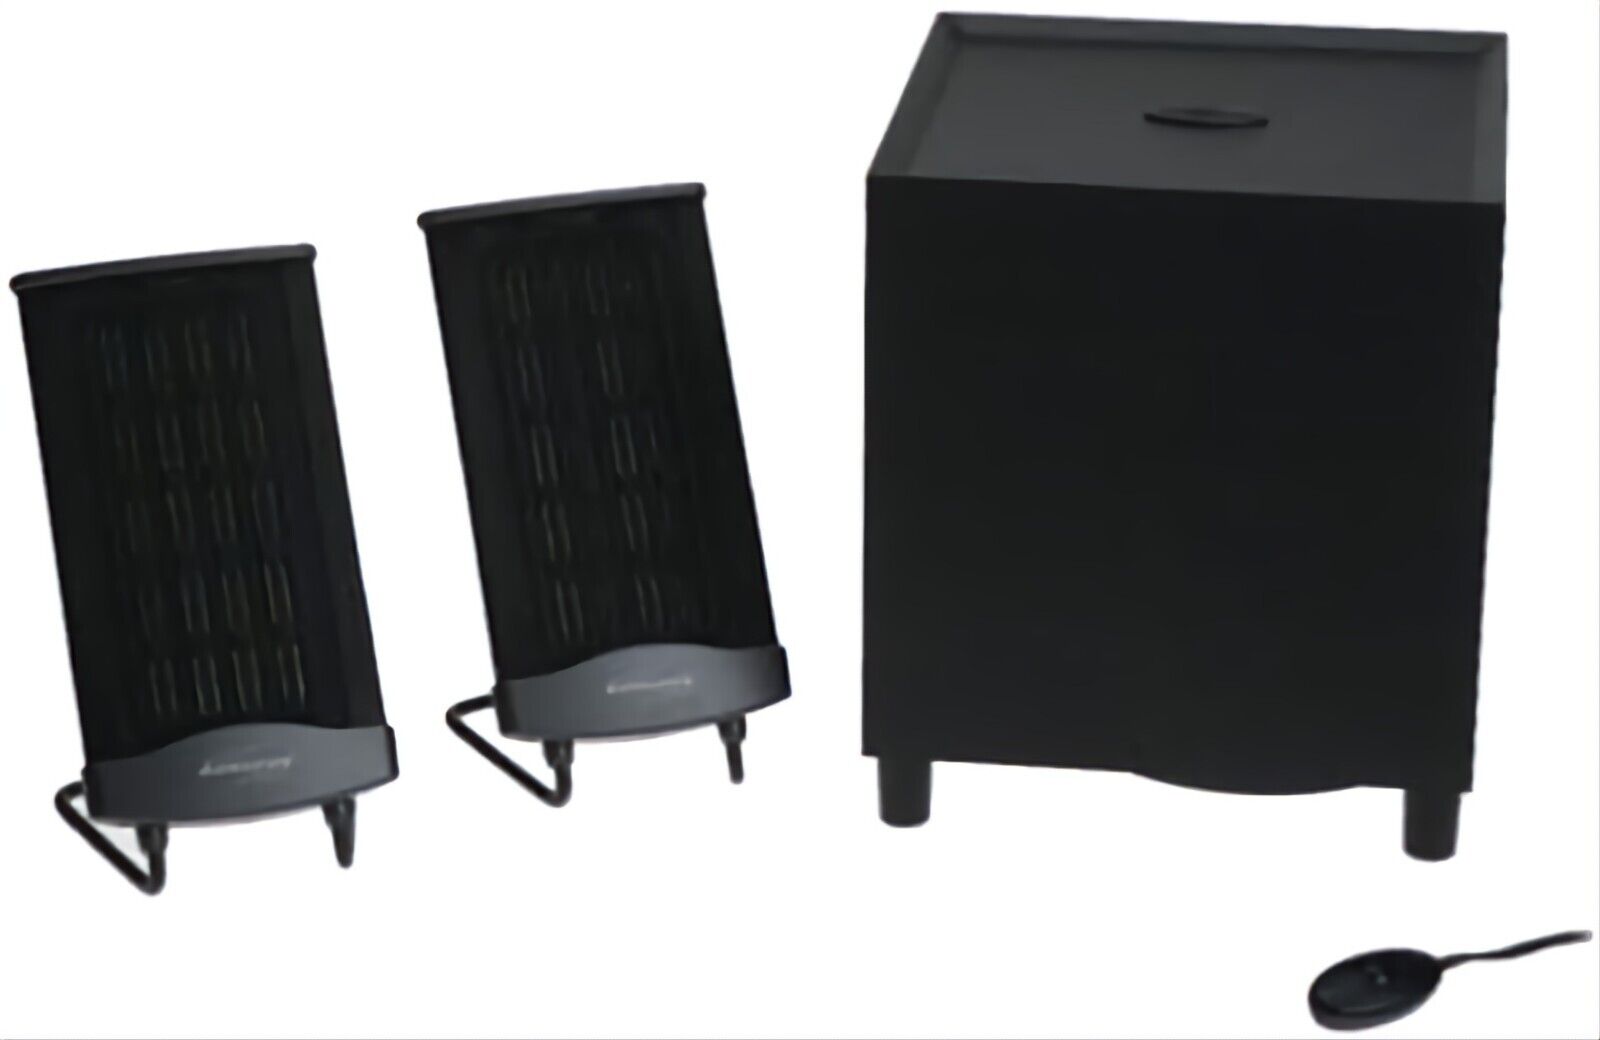 Rare Monsoon MM-700 Flat Panel Speaker System w/Subwoofer Amplified Sounds Great